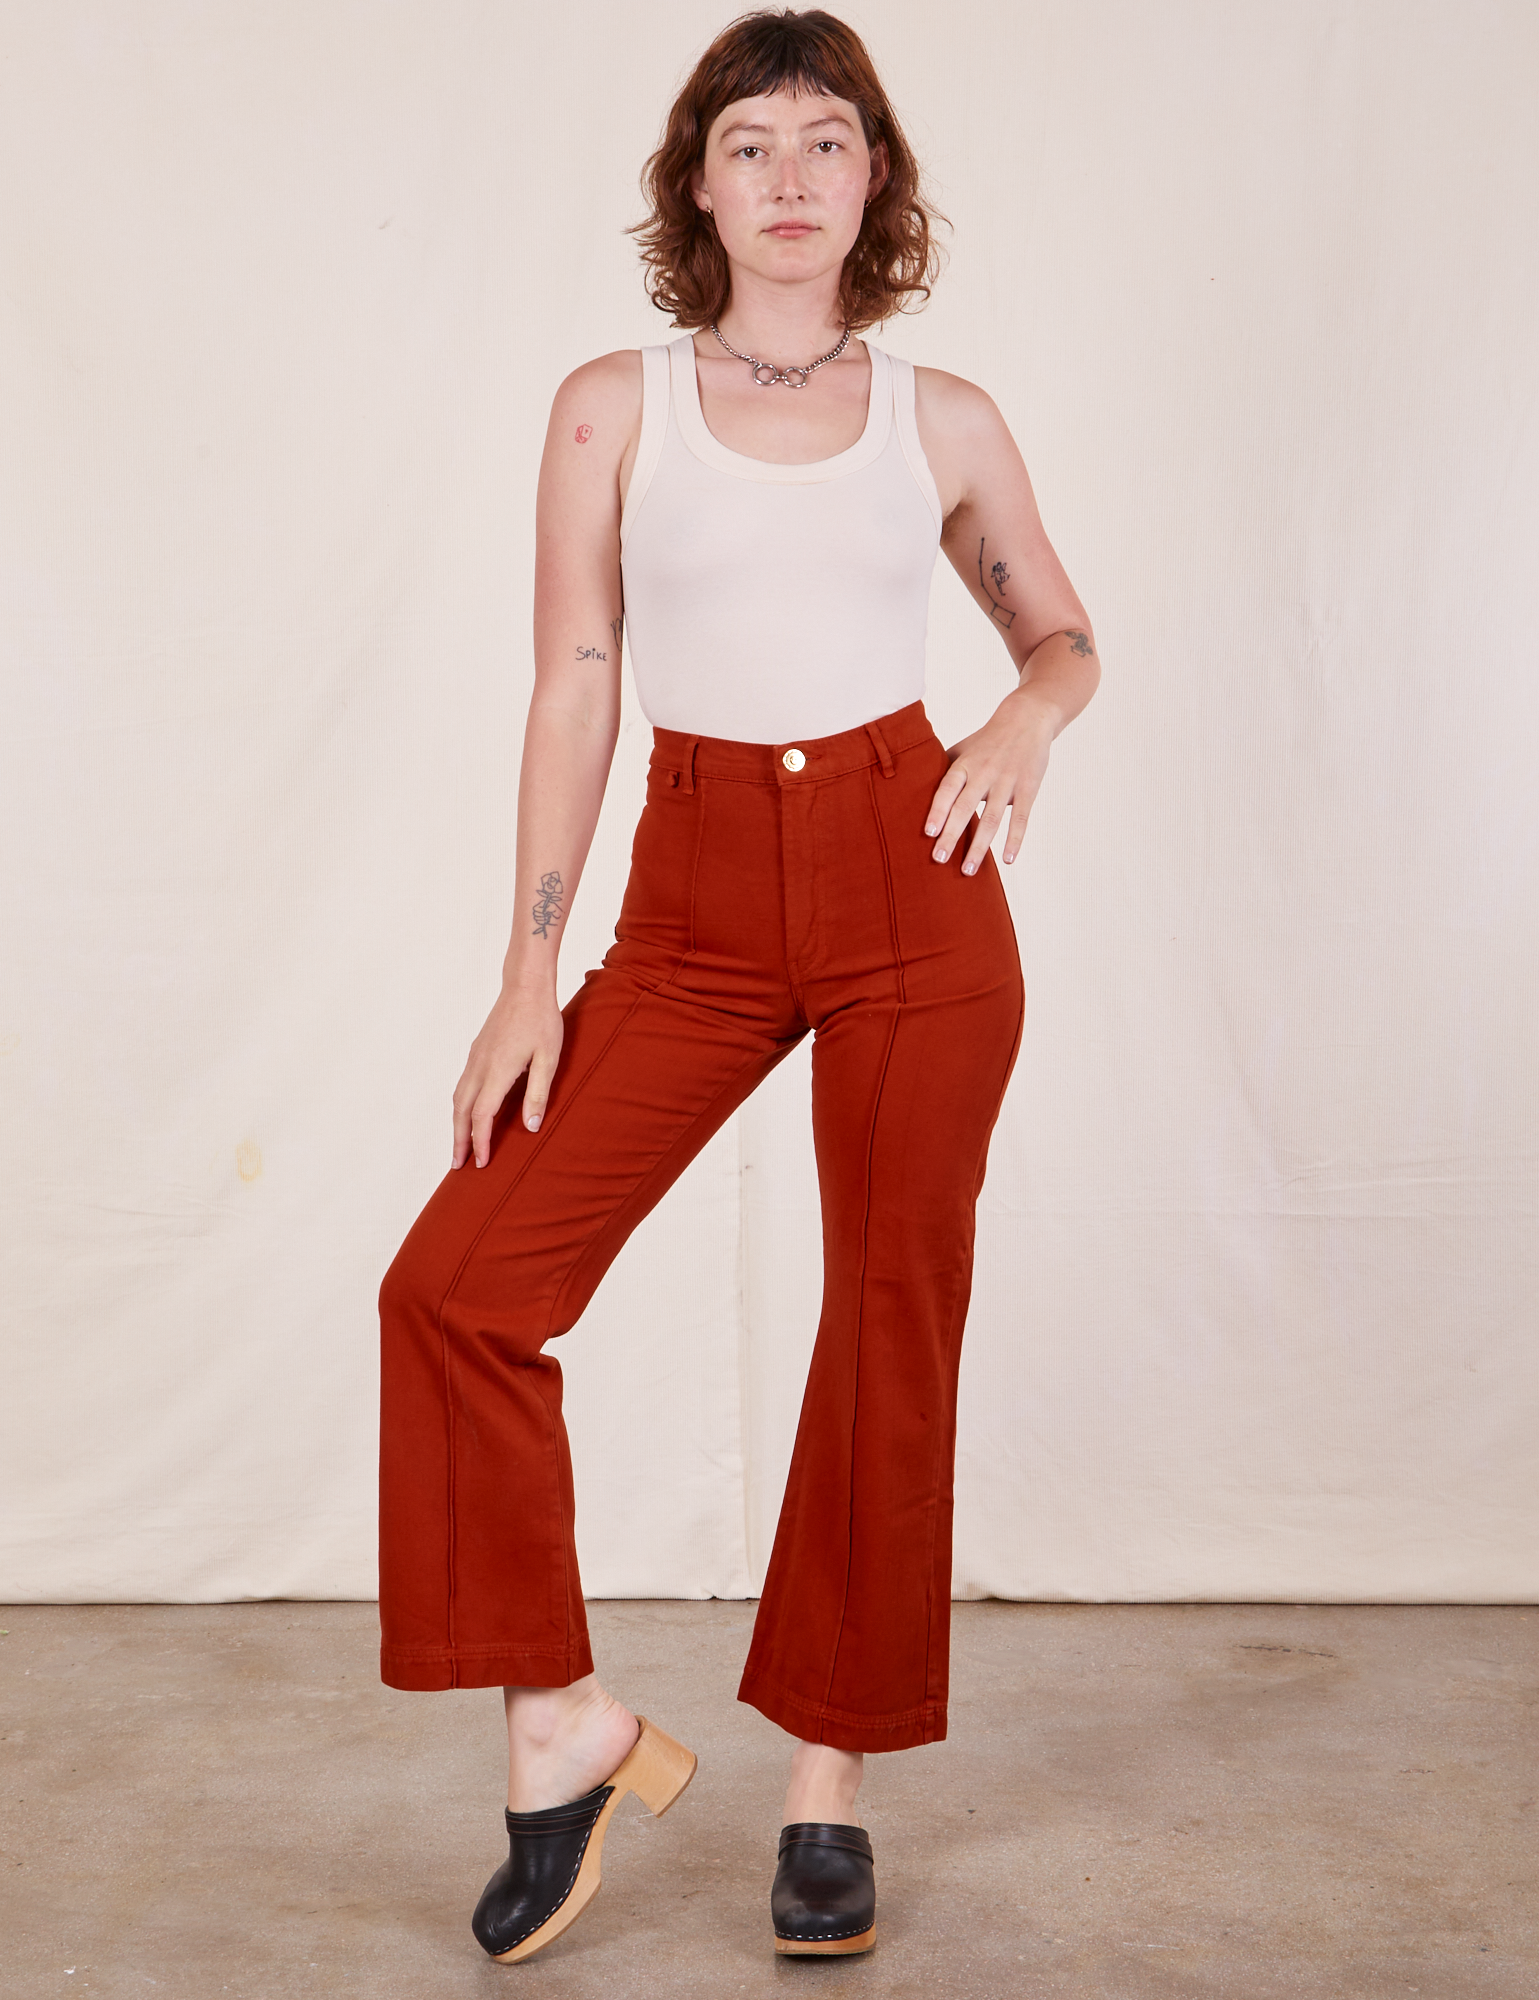 Alex is 5&#39;8&quot; and wearing XS Western Pants in Paprika and vintage off-white Tank Top